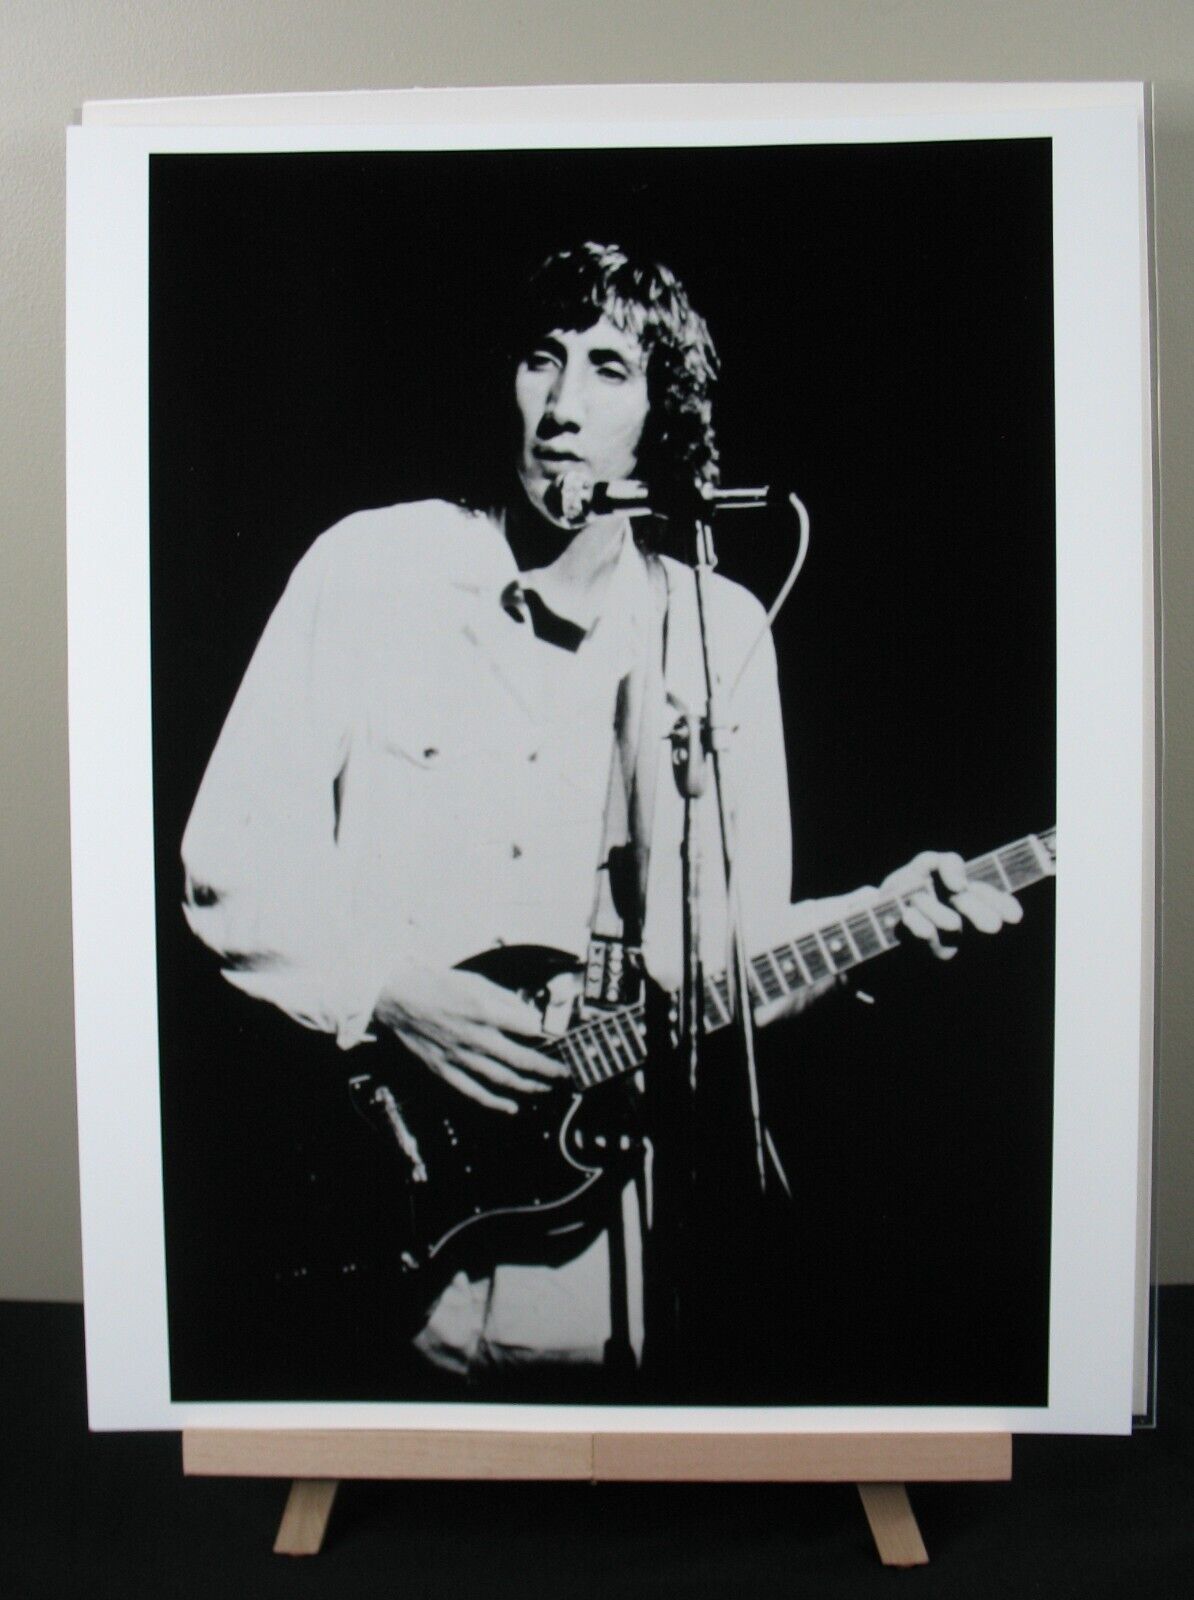 Pete Townshend The Who Large Format 16x20 Vintage Photograph